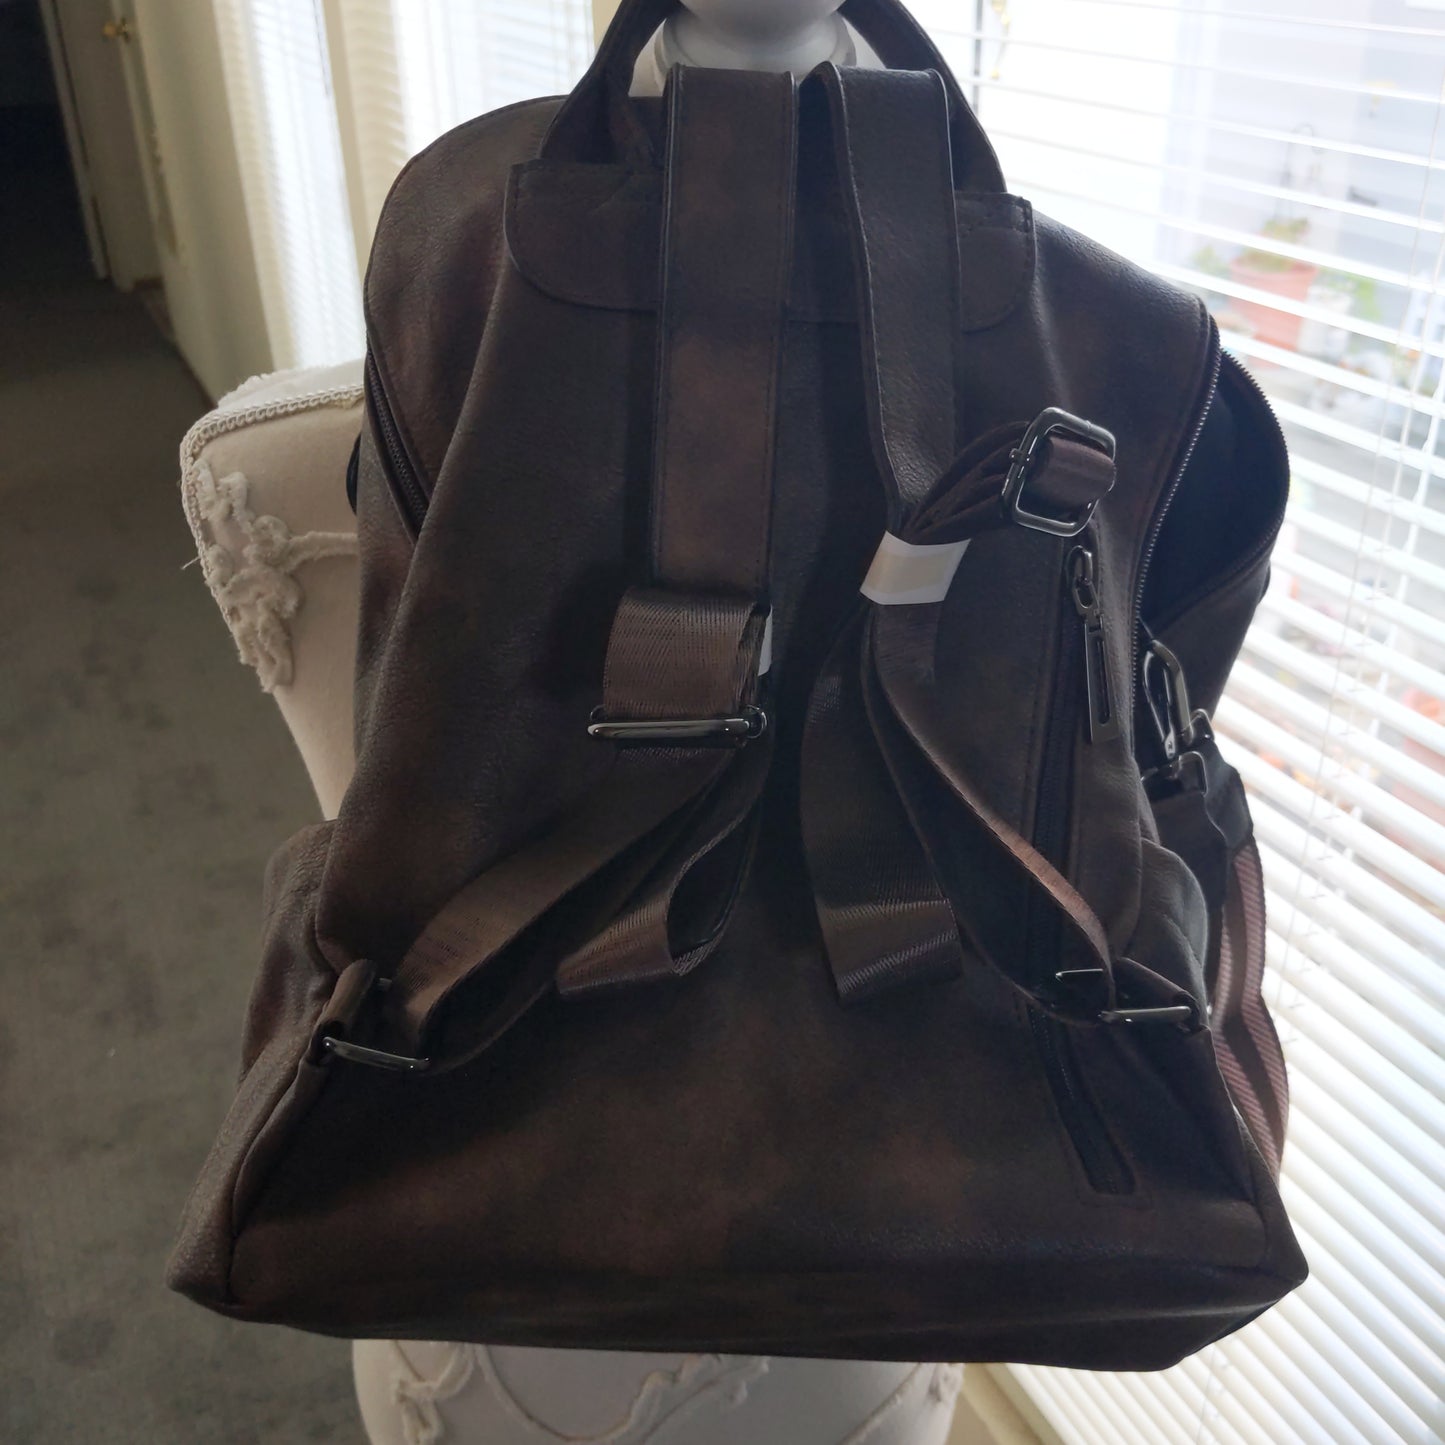 Opage Brown Leather Backpack Purse